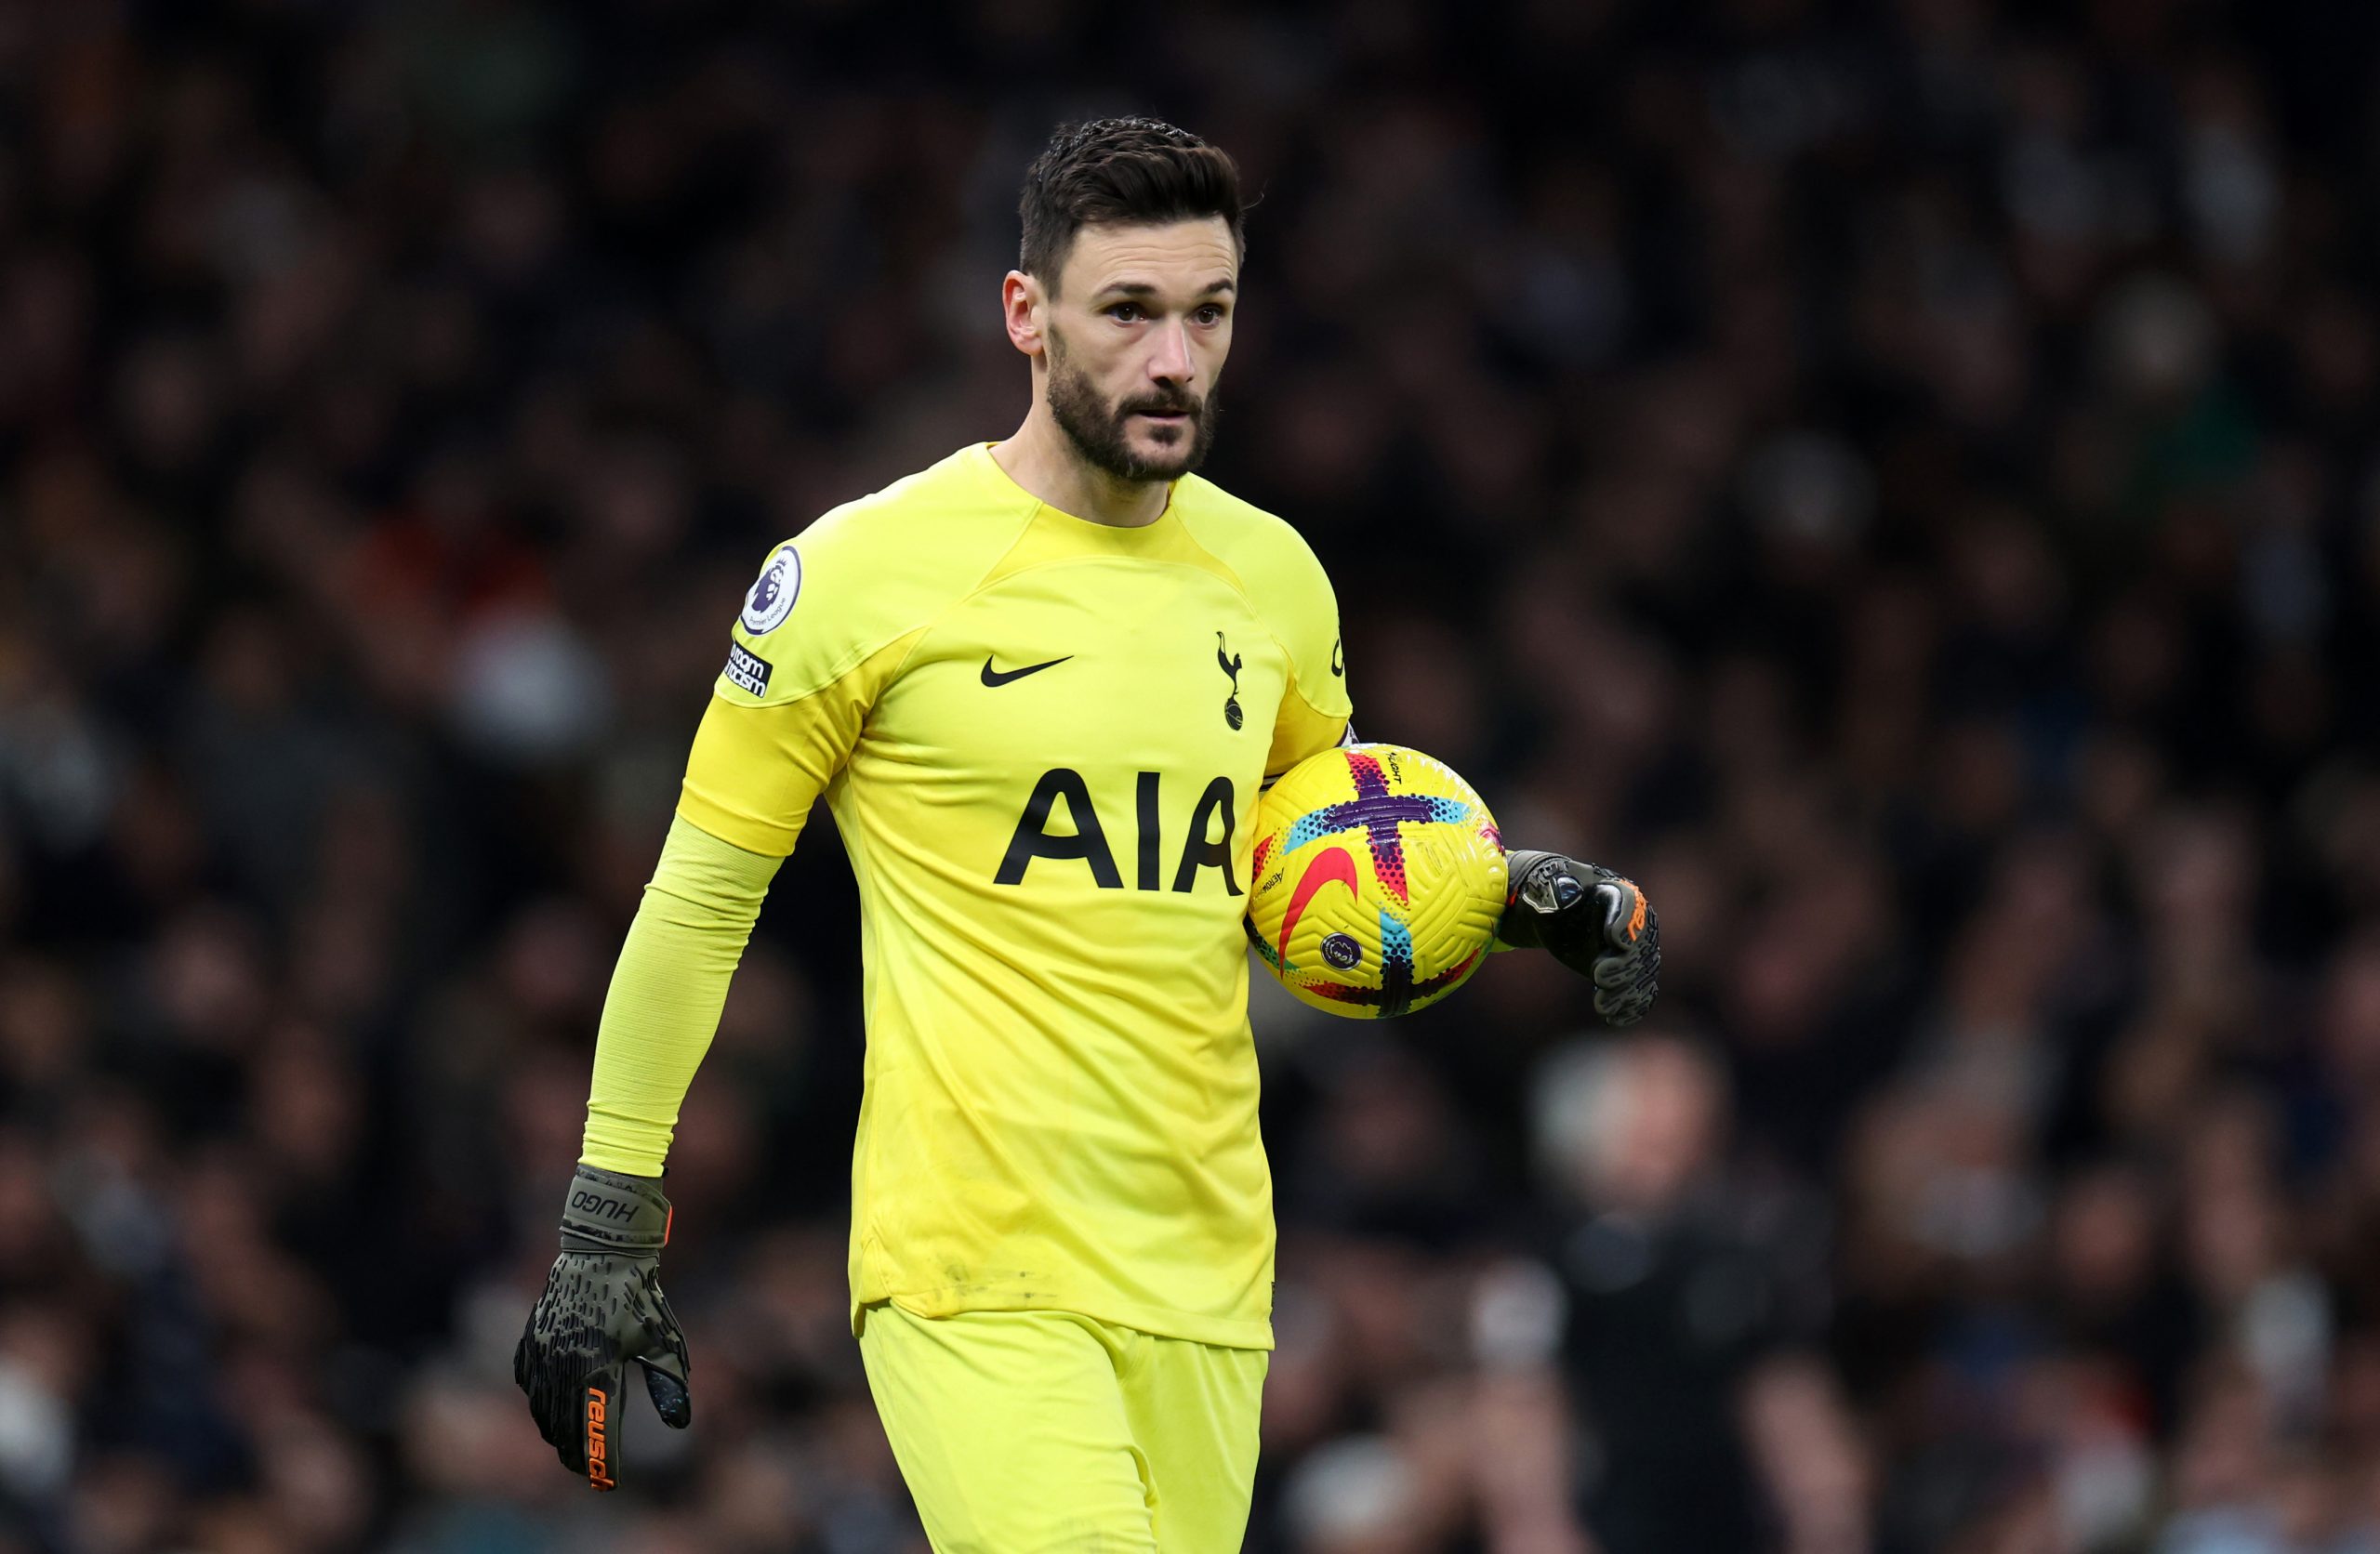 Former captain Hugo Lloris says he is grateful for the farewell right before leaving for the MLS